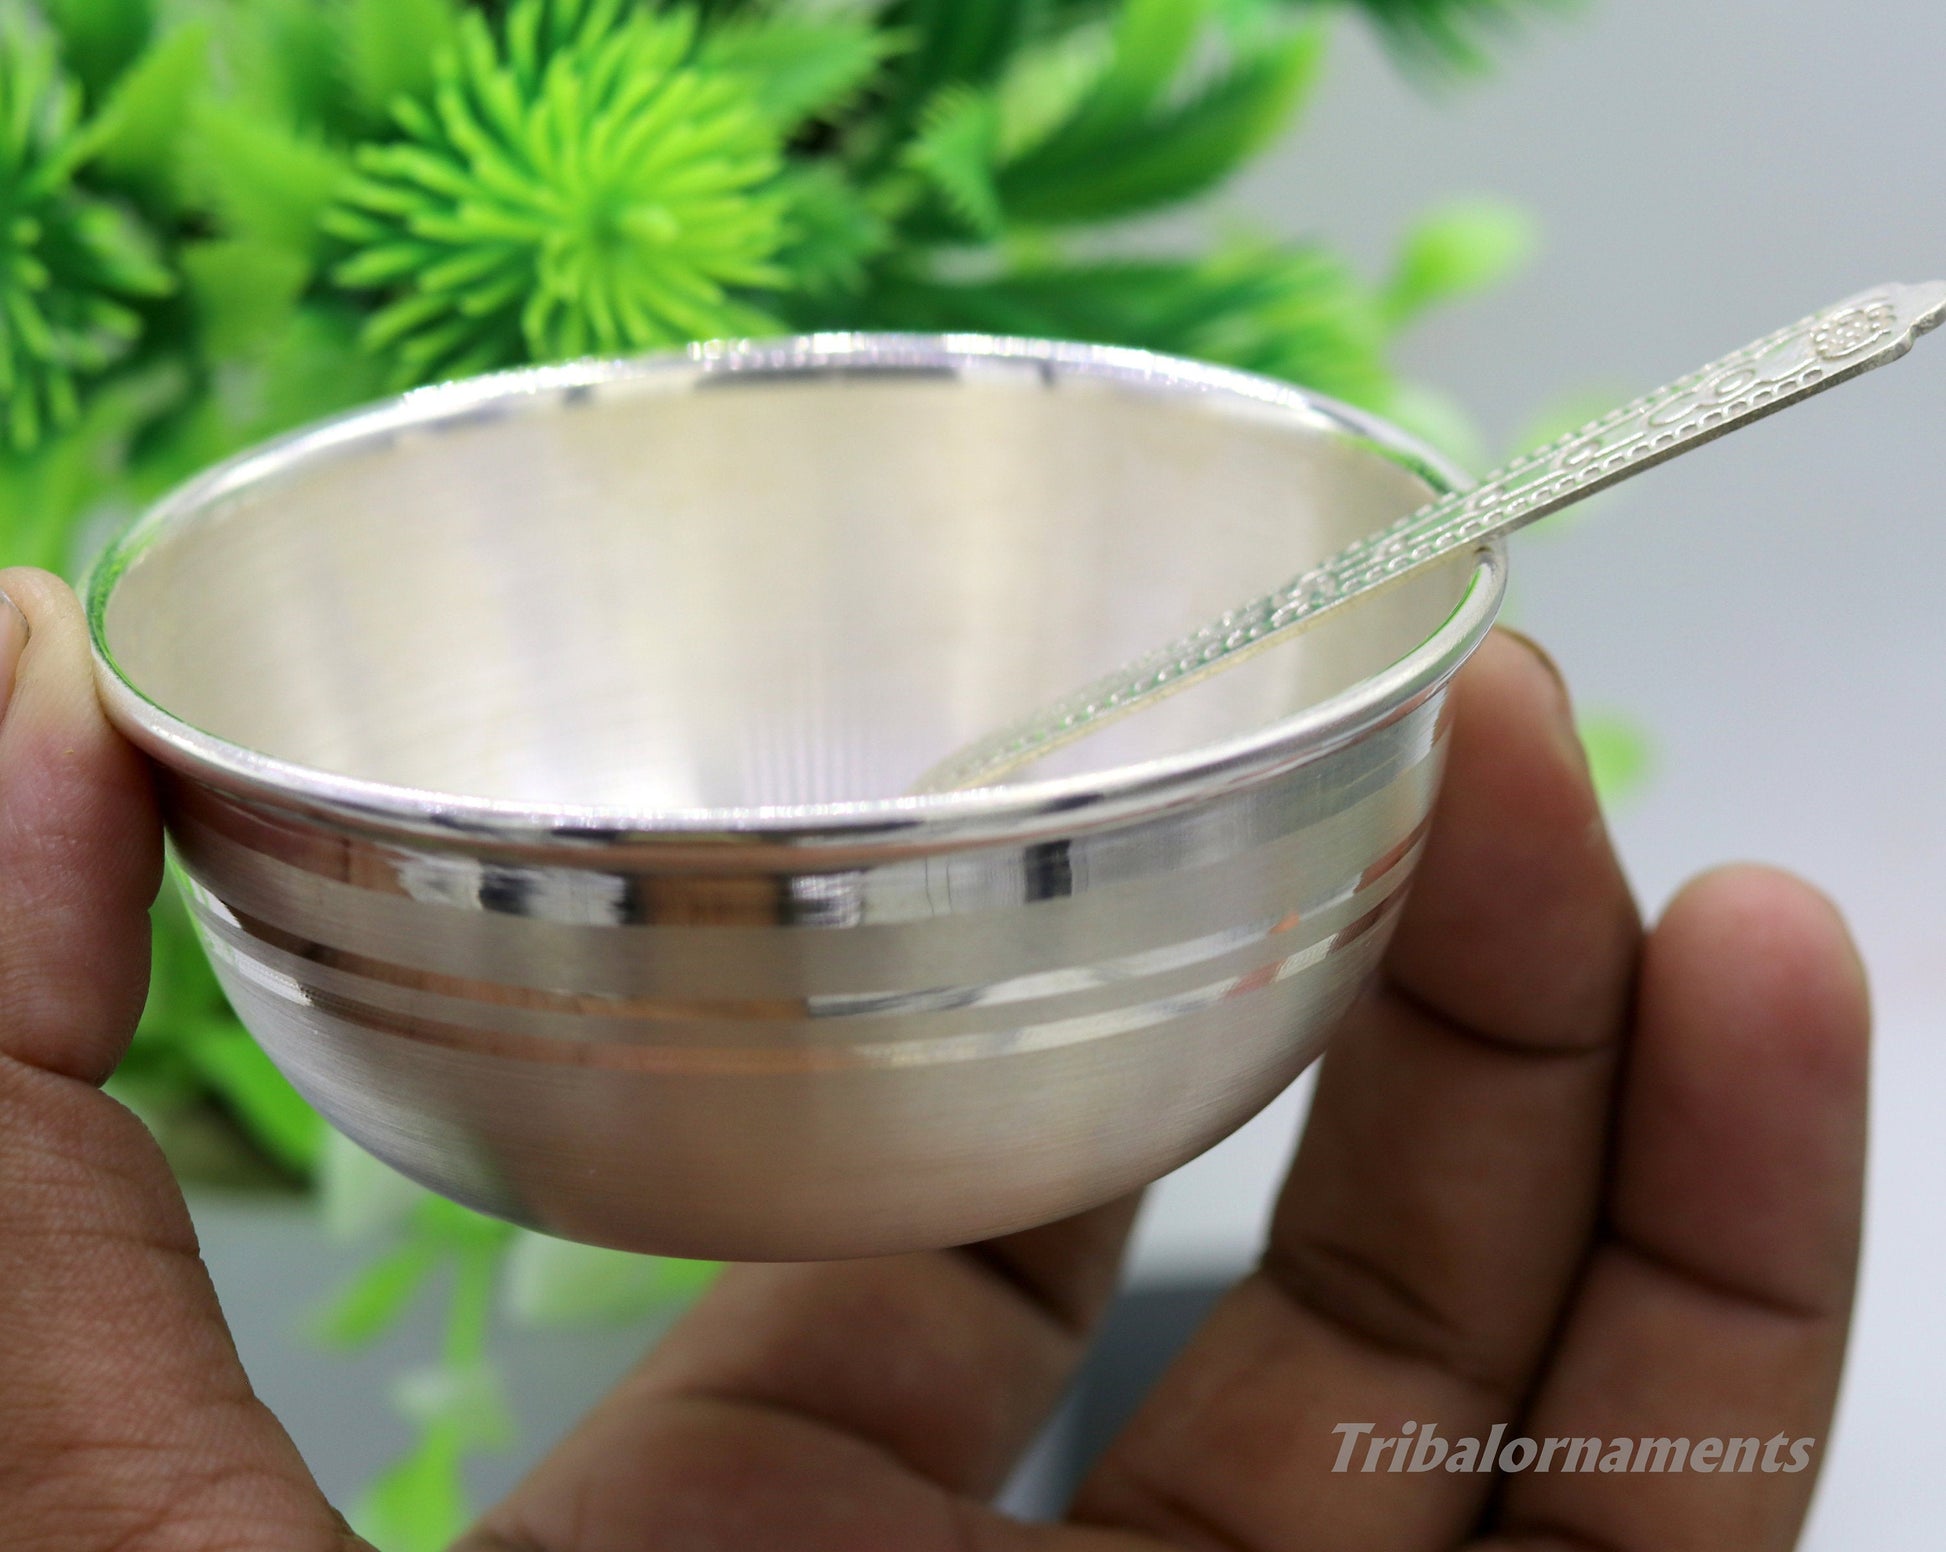 999 pure sterling silver handmade solid silver bowl and spoon, silver has antibacterial properties, keep stay healthy, silver vessels sv24 - TRIBAL ORNAMENTS